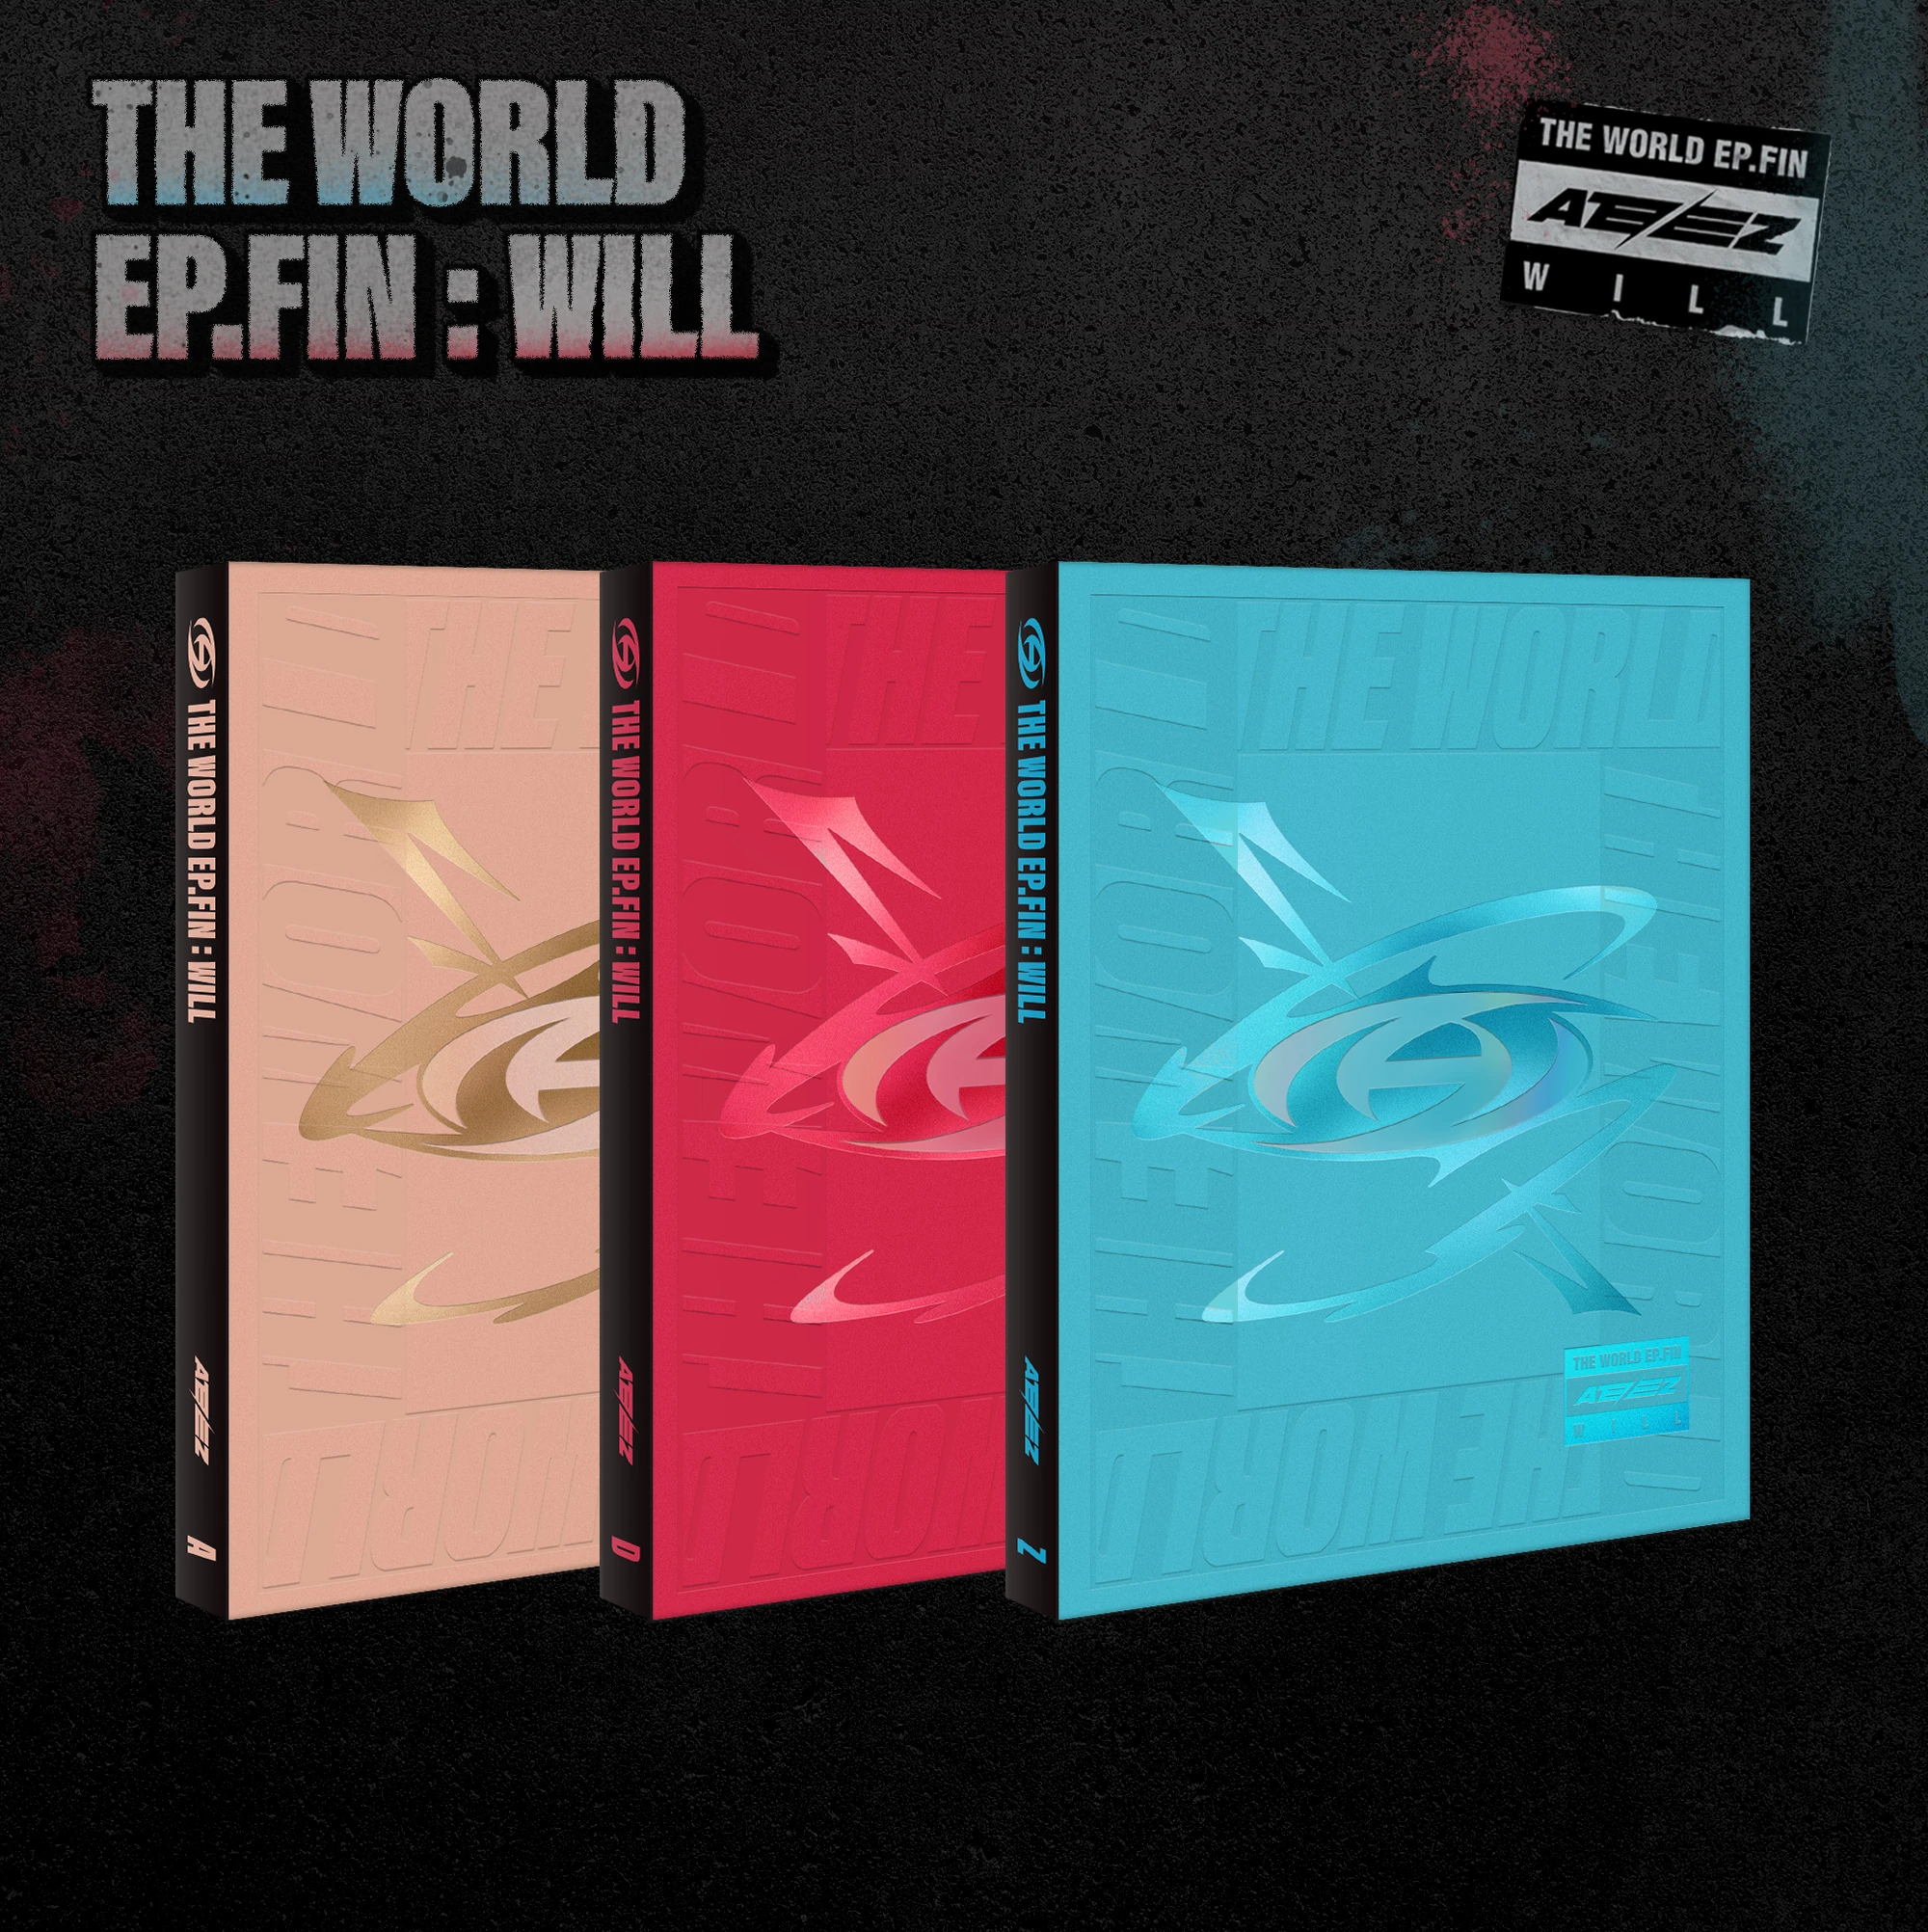 ATEEZ [THE WORLD EP.FIN : WILL] (3 Versions) | Makestar